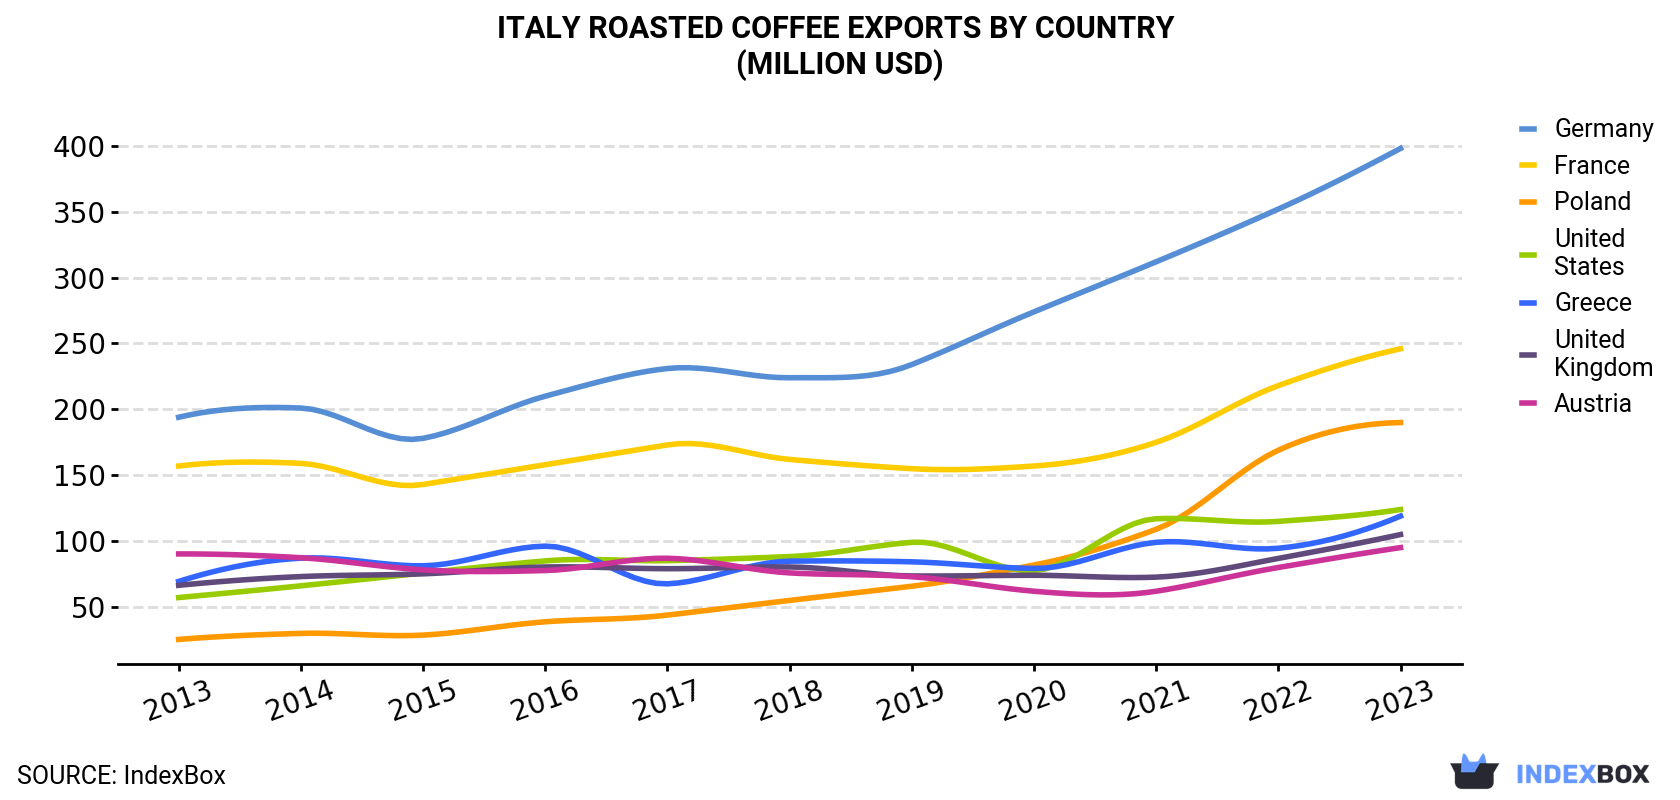 Italy Roasted Coffee Exports By Country (Million USD)